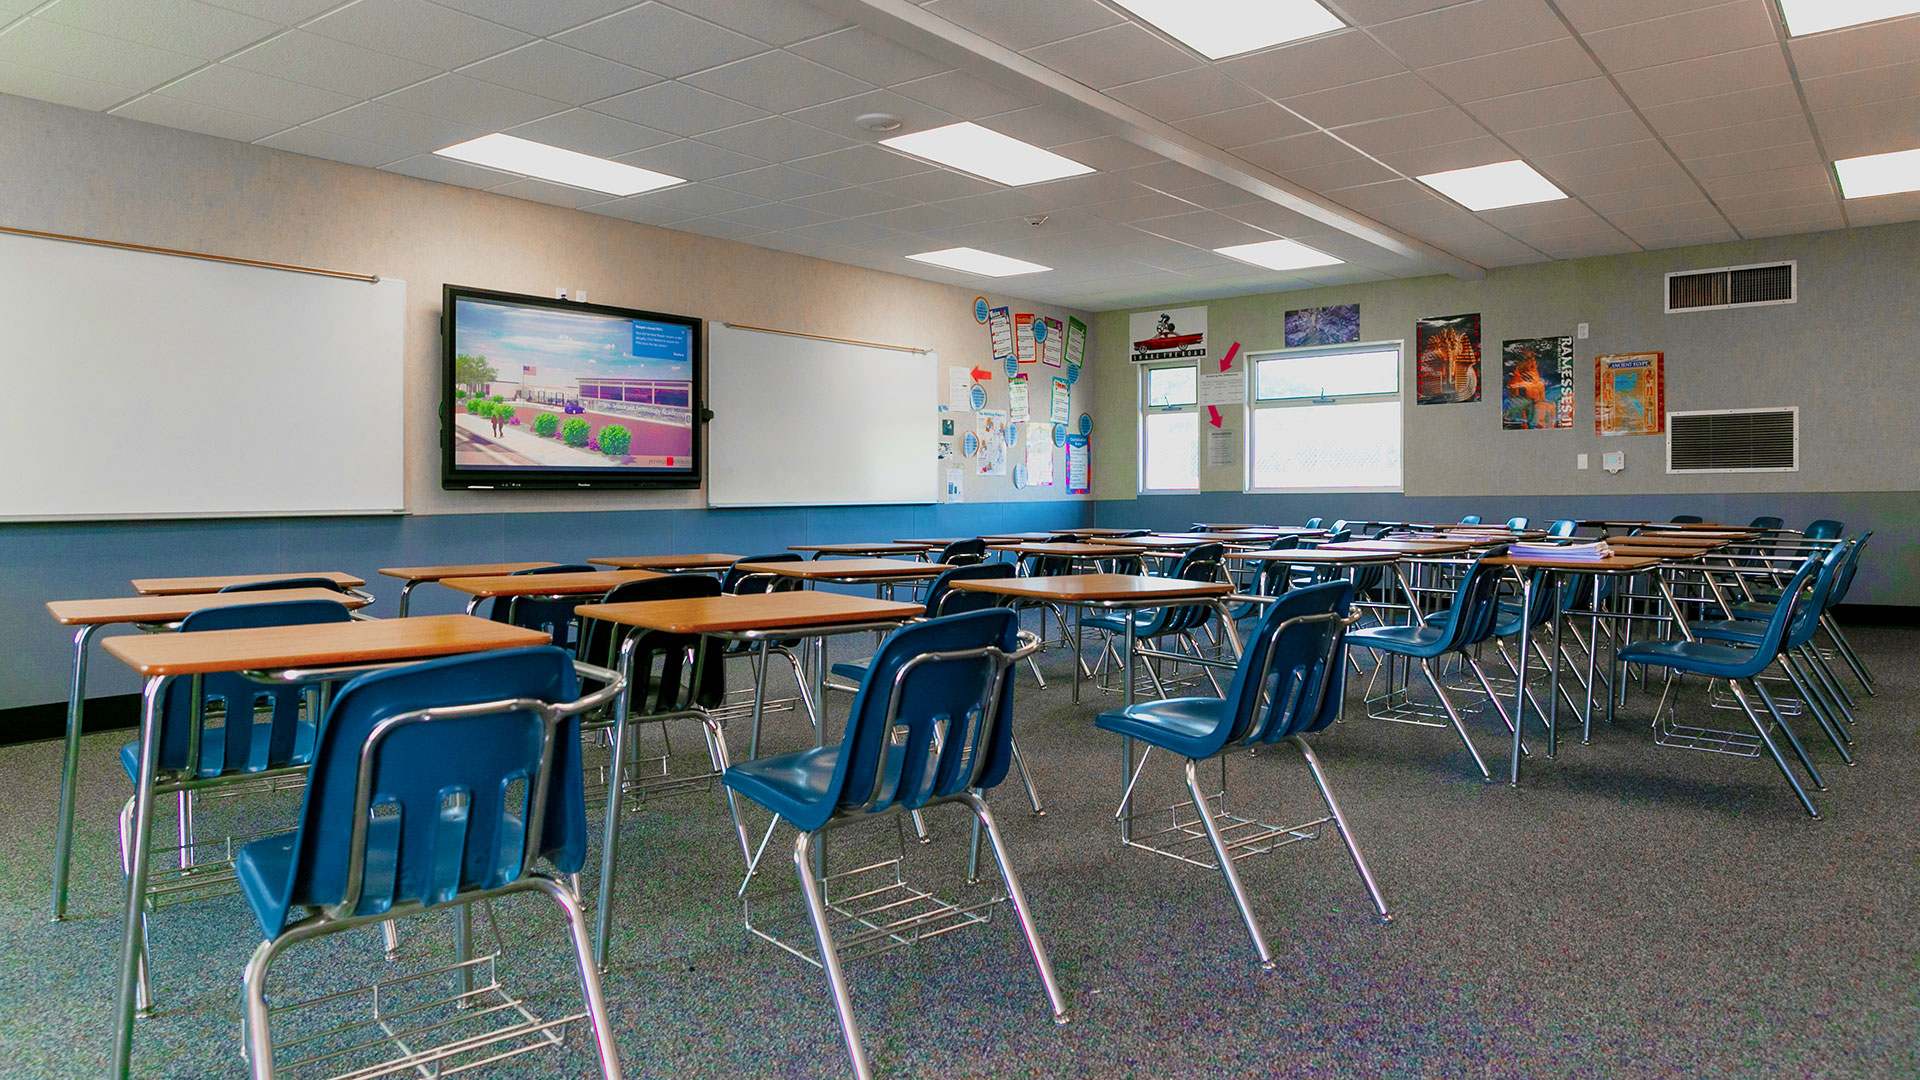 Renovated portable classroom interior, with bright windows, desks, and a teaching area.